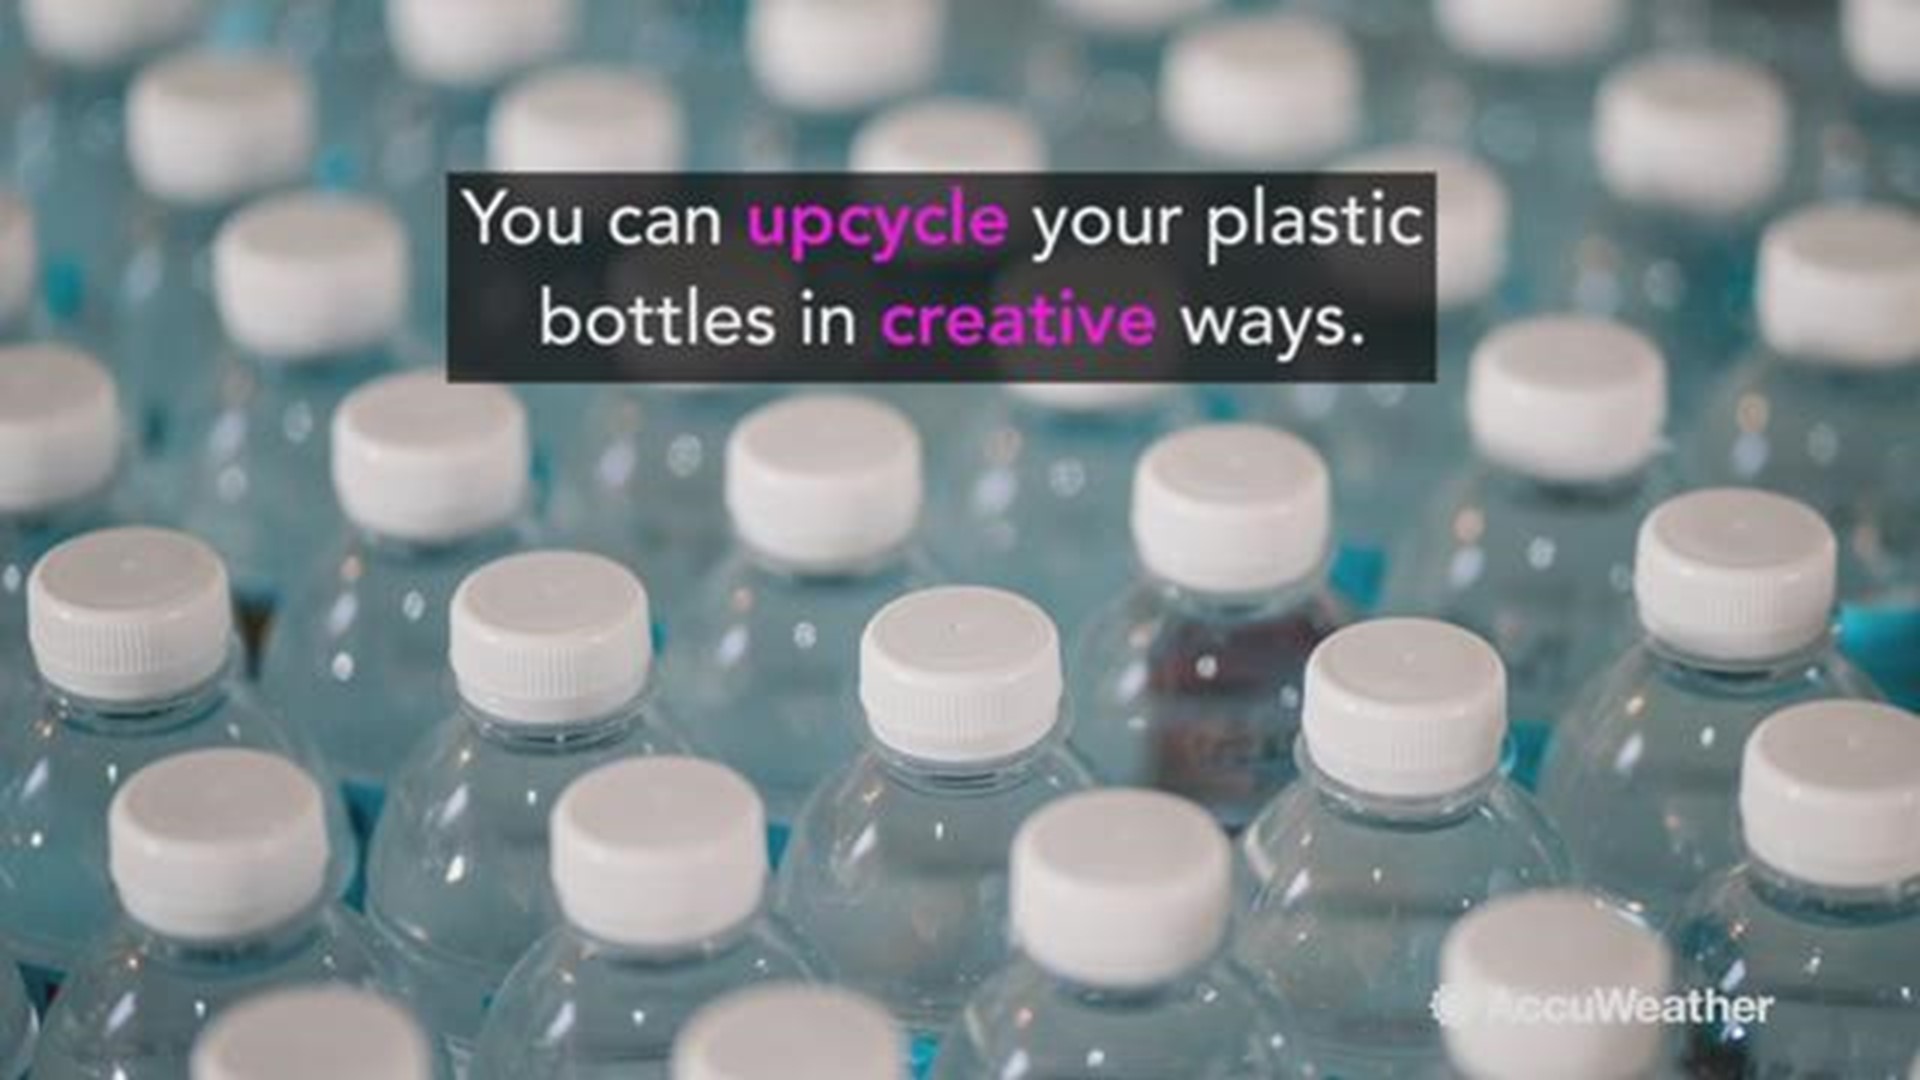 Use your DIY skills to transform plastic bottles into items that can be handy in other ways.